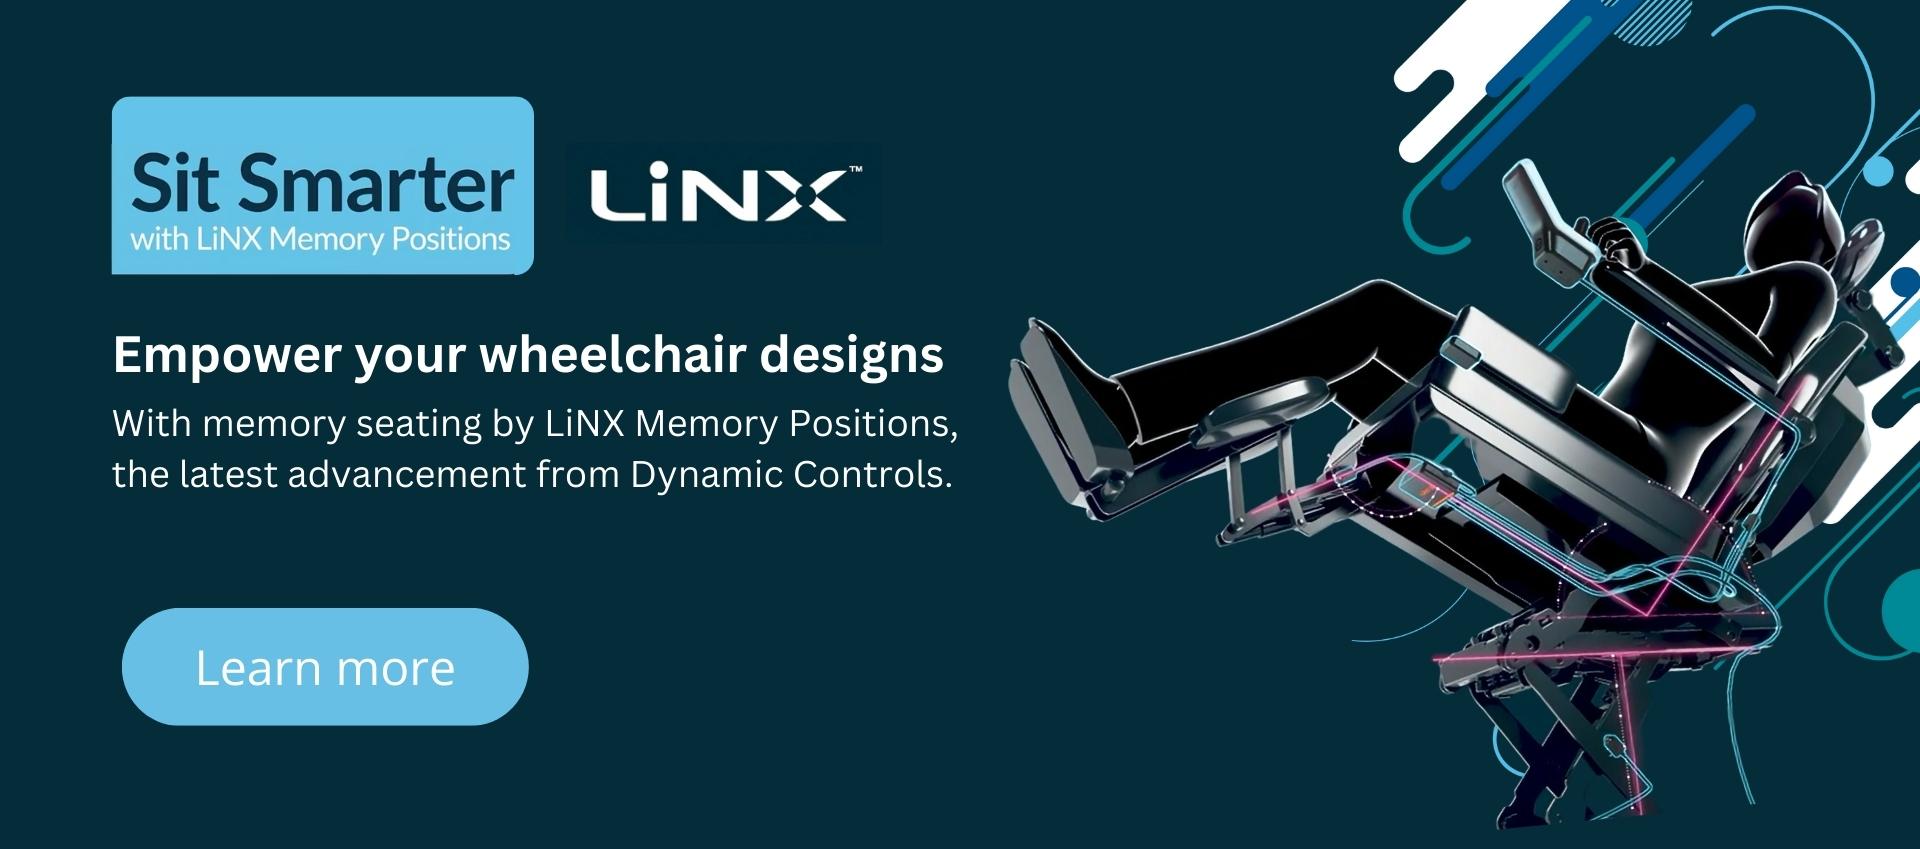 Sit Smarter with LiNX Memory Positions